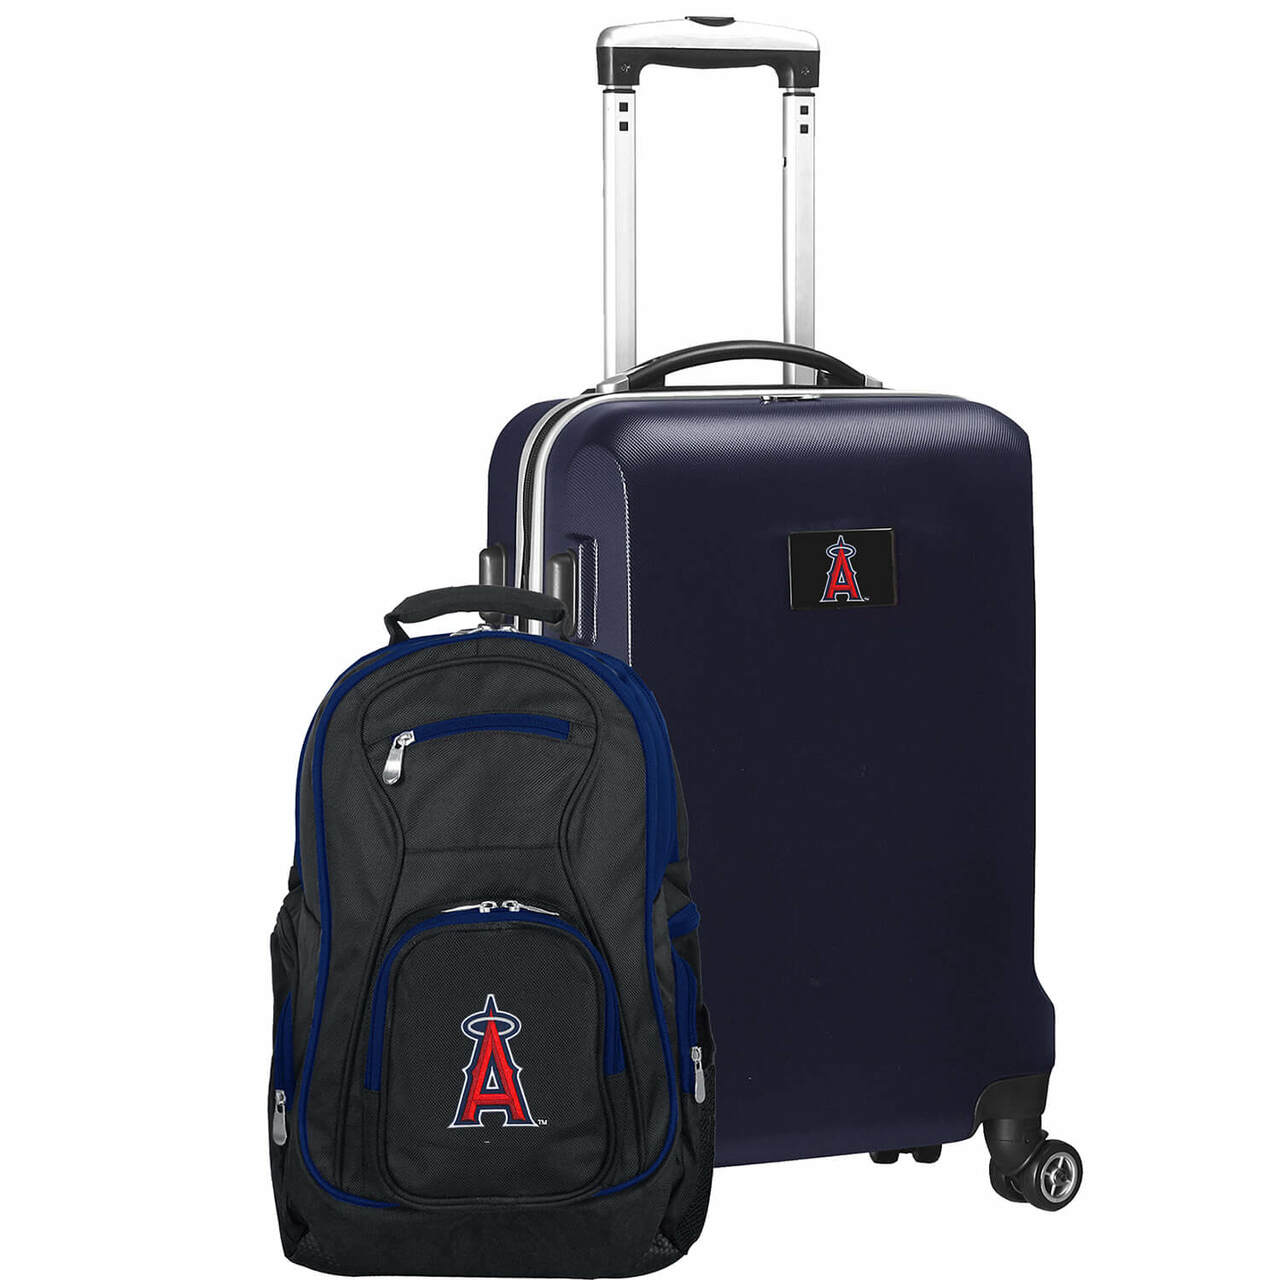 Los Angeles Angels Deluxe 2-Piece Backpack and Carry on Set in Navy